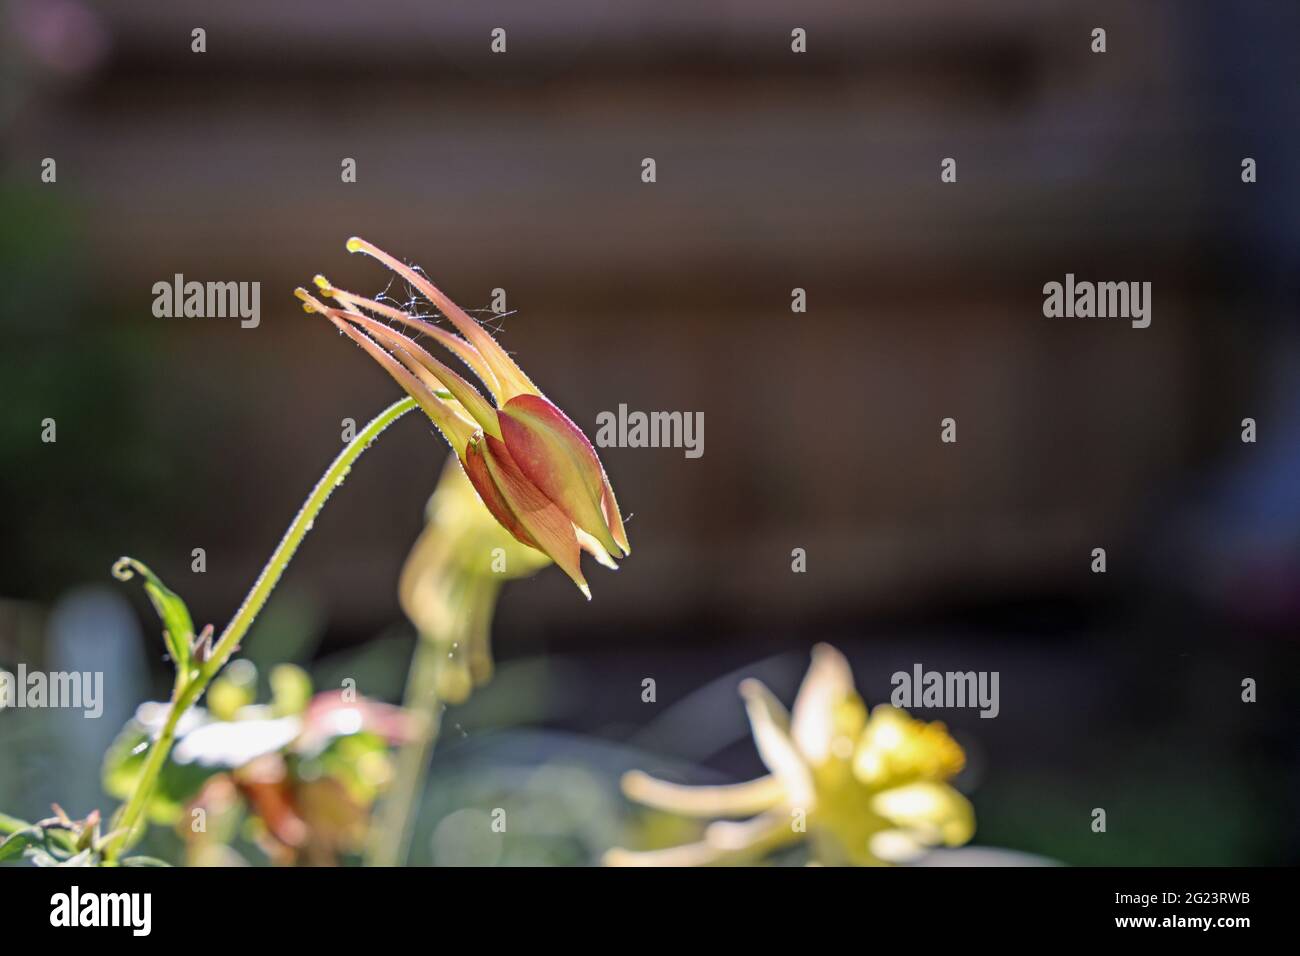 A columbine also known as the Yellow Queen and Granny’s Bonnet, A closed specimen being visited by a grren fly pest. Stock Photo